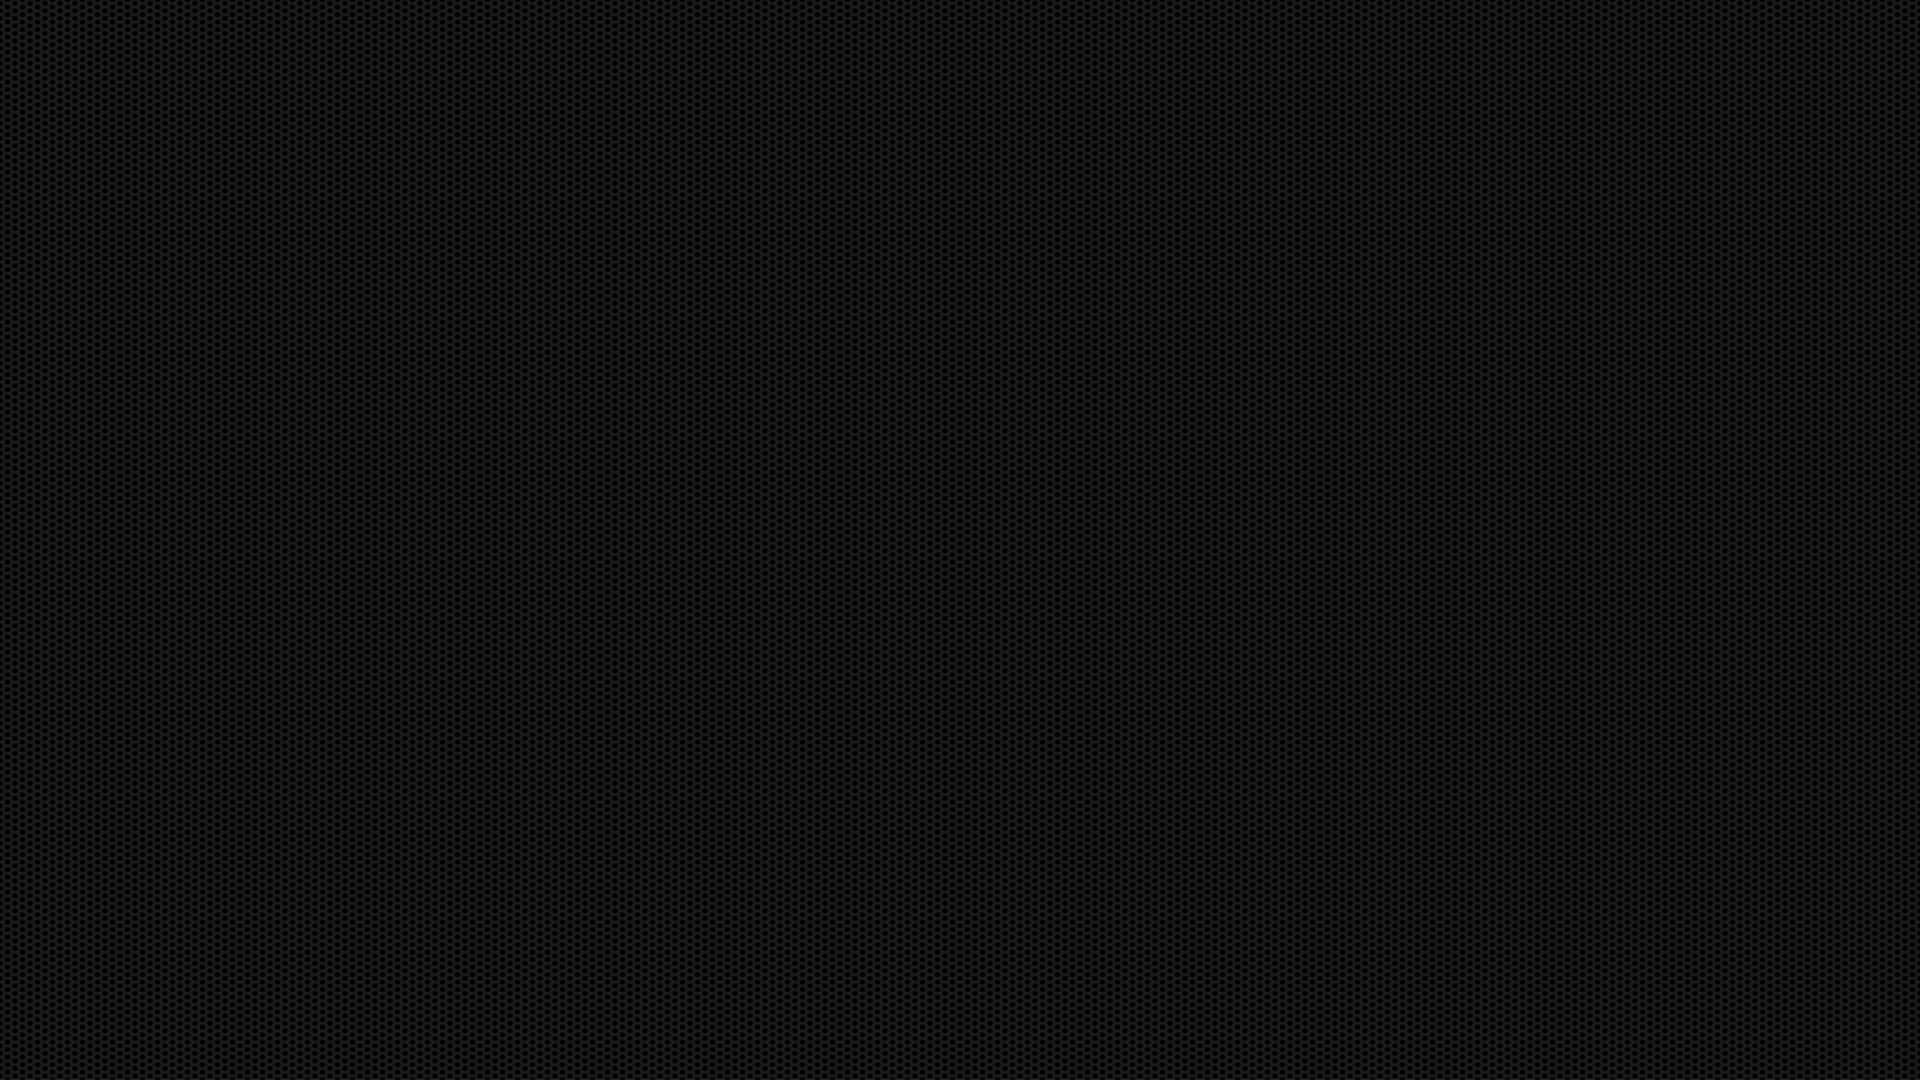 Dark and Mysterious Wallpaper